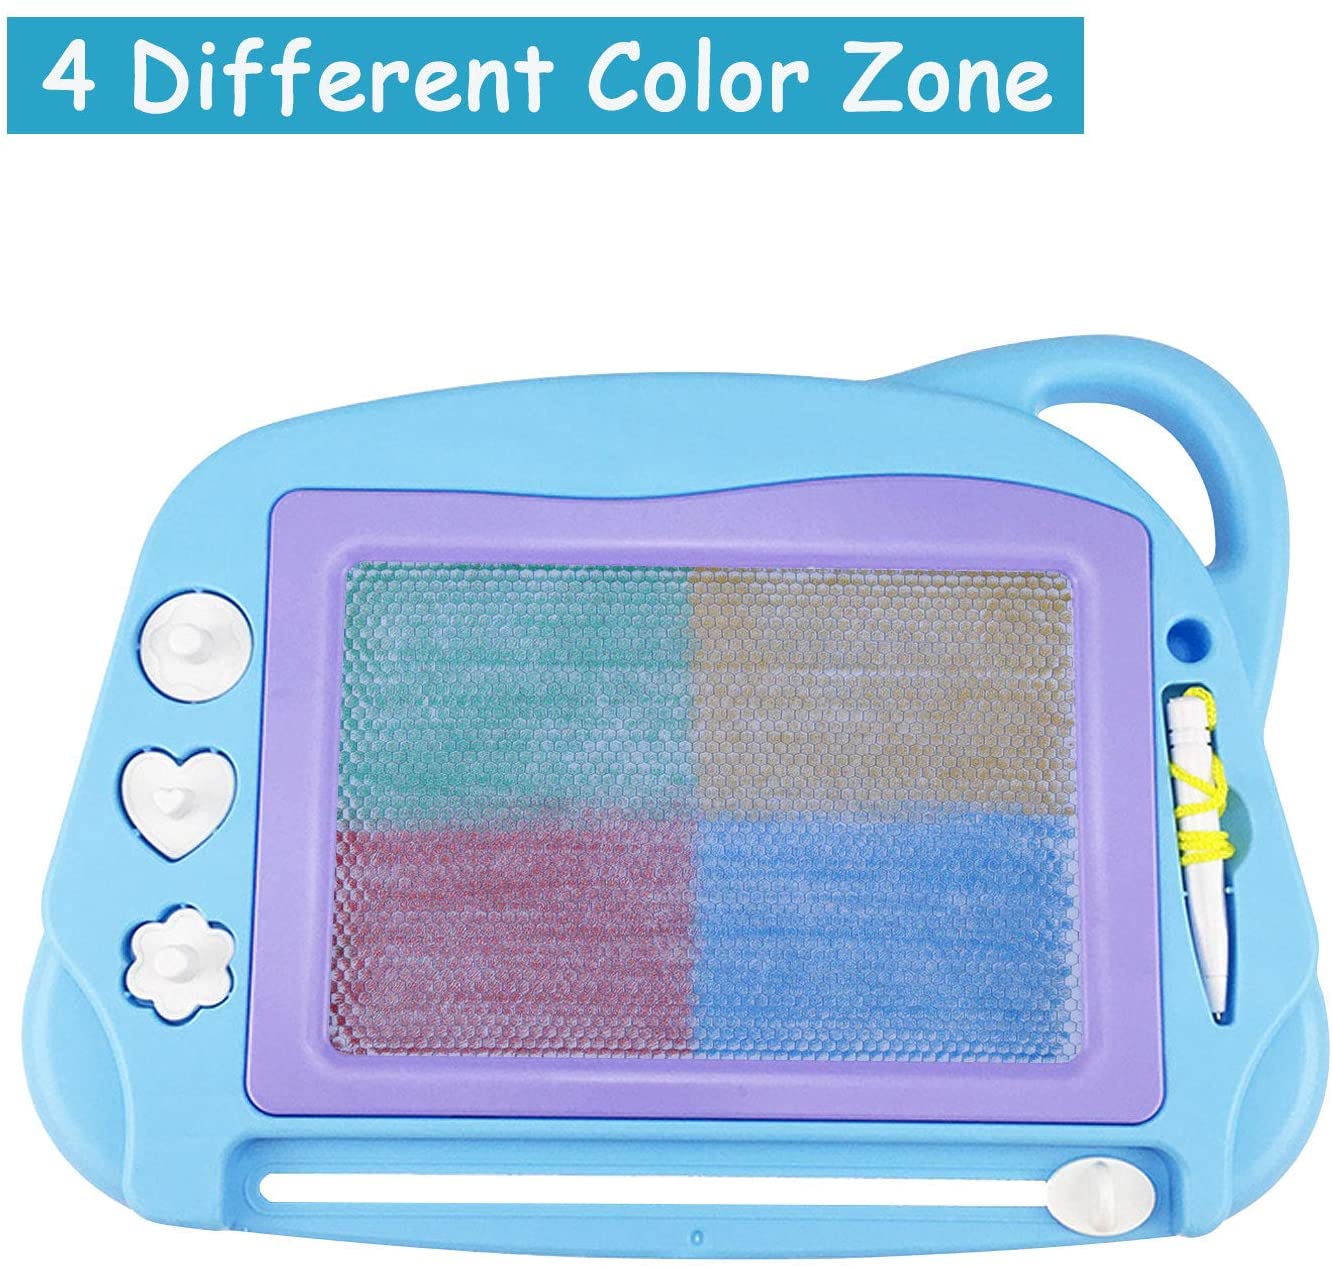 Large Erasable Doodle Board Writing Painting Sketch Pad Creative Educational Toys for Kids Boys Girls AiTuiTui Magnetic Drawing Board for Toddlers